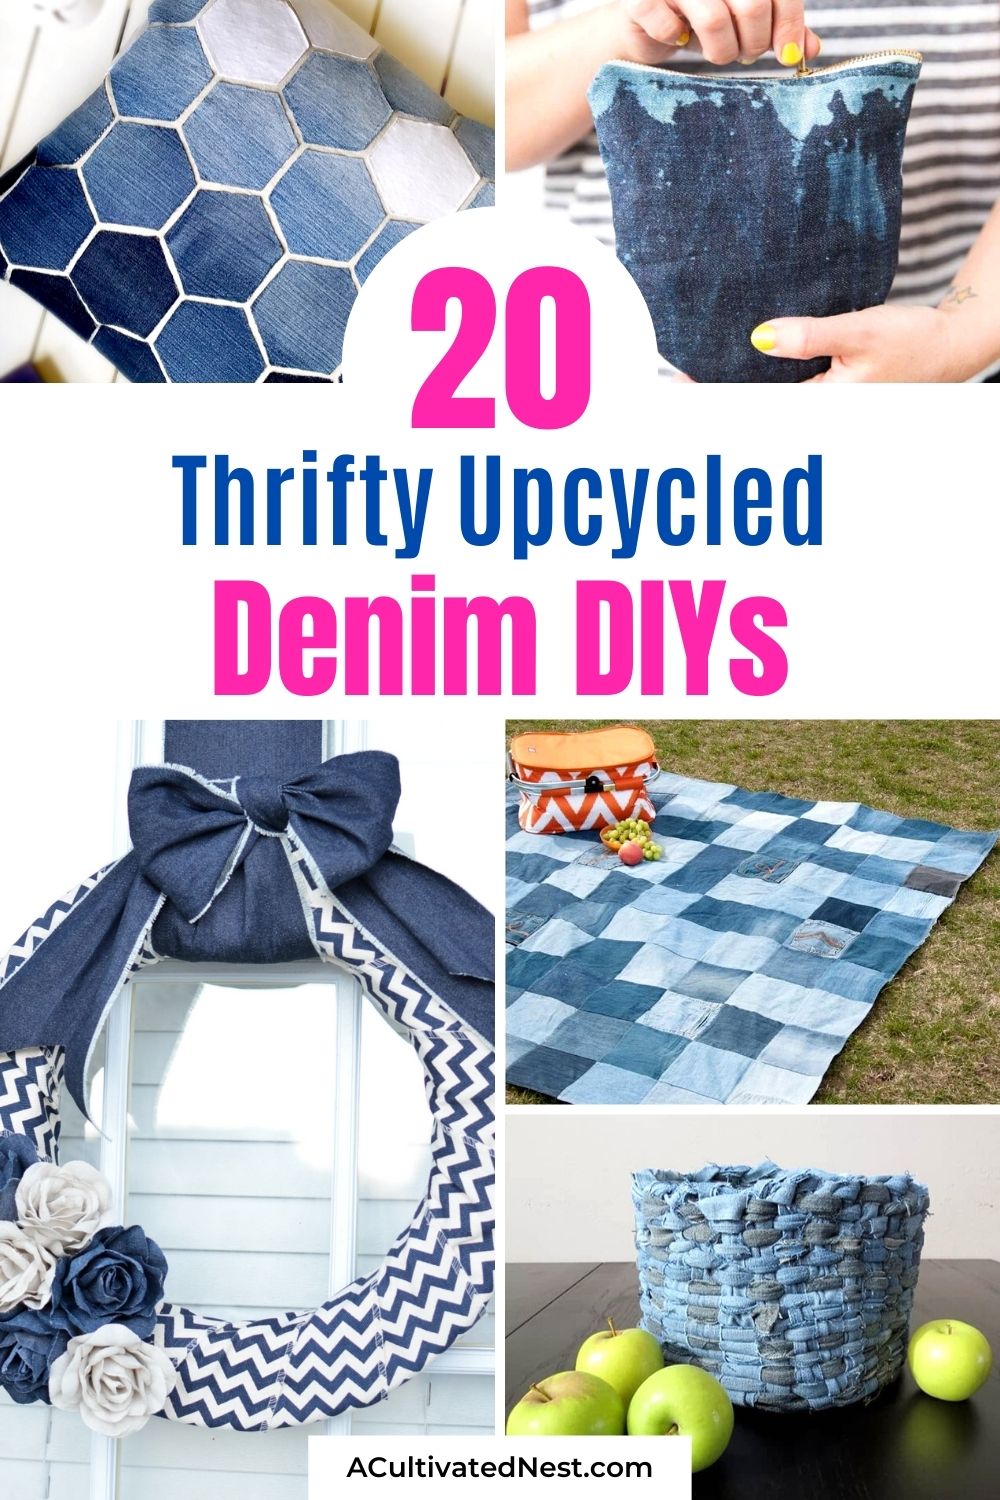 20 Thrifty Upcycled Denim Projects- If you have old jeans or torn denim clothes, don't throw them out! Instead, give them new uses with these thrifty upcycled denim projects! Many of these denim repurposing DIYs would make great homemade gifts! | ways to use old jeans, how to use up old jeans, handmade gift, easy sewing, beginner sewing, repurpose, recycle, #upcycling #handmadeGift #sewing #craft #ACultivatedNest